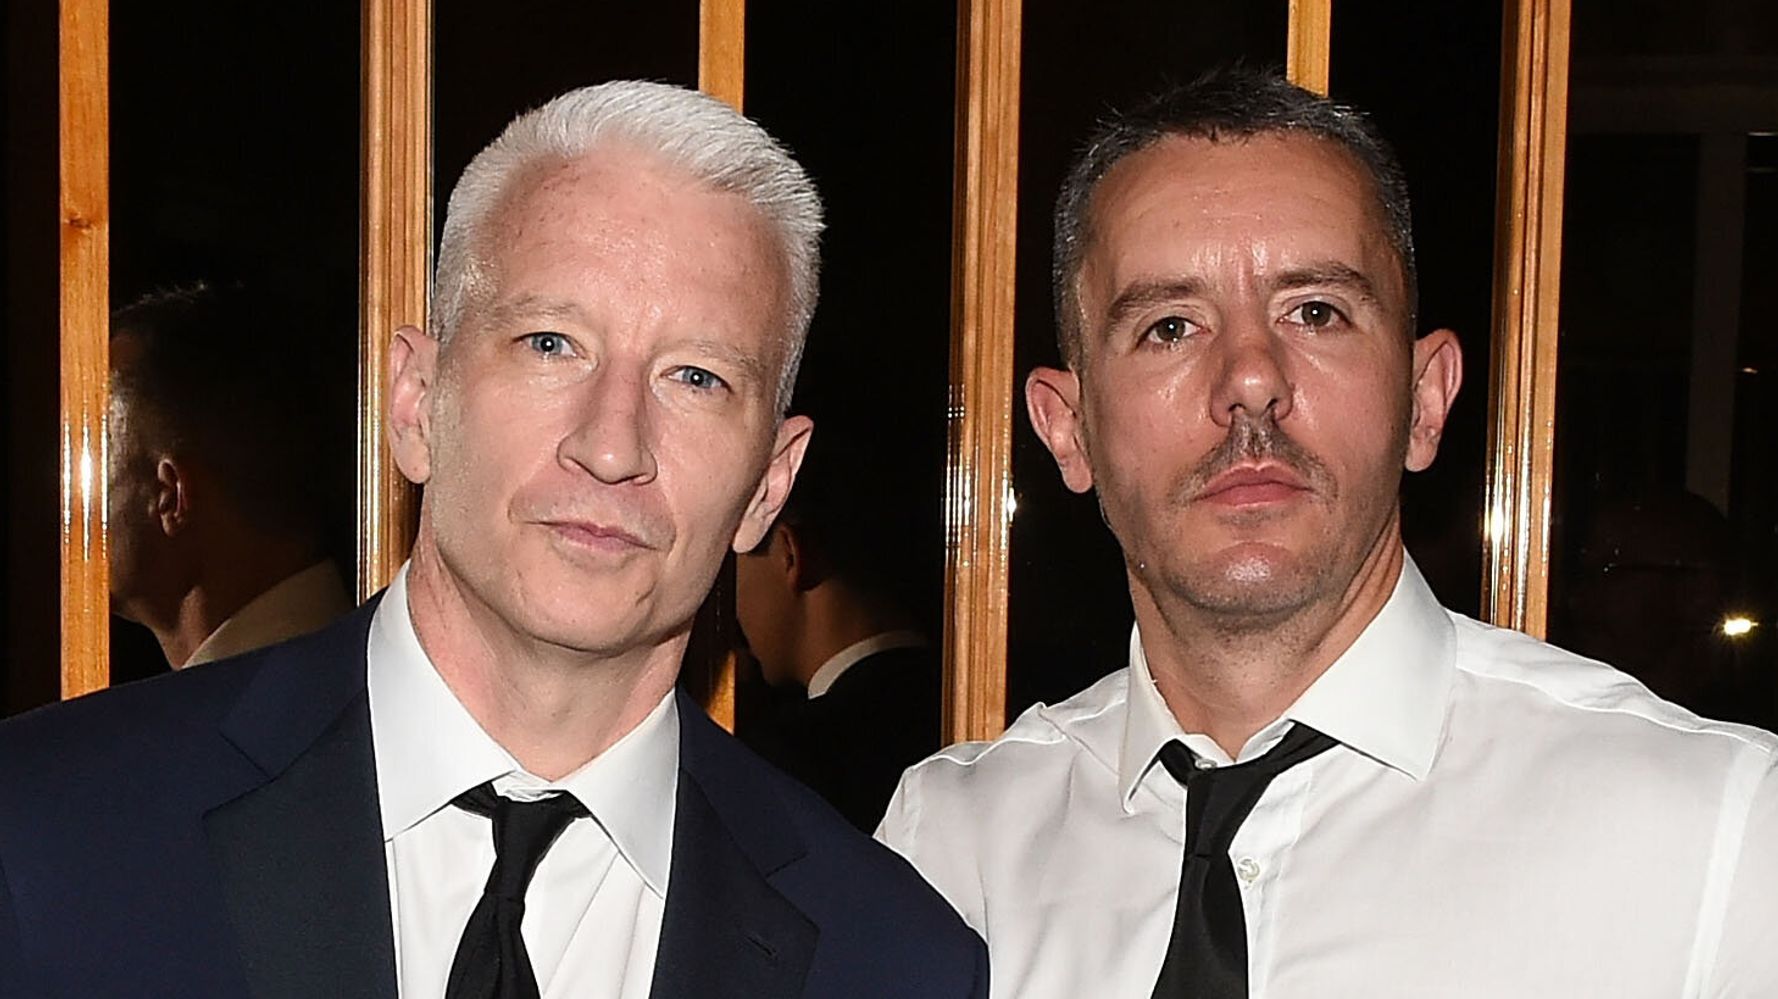 Anderson Cooper Got 'Really Pissed' At His Ex After Son's Milestone Moment